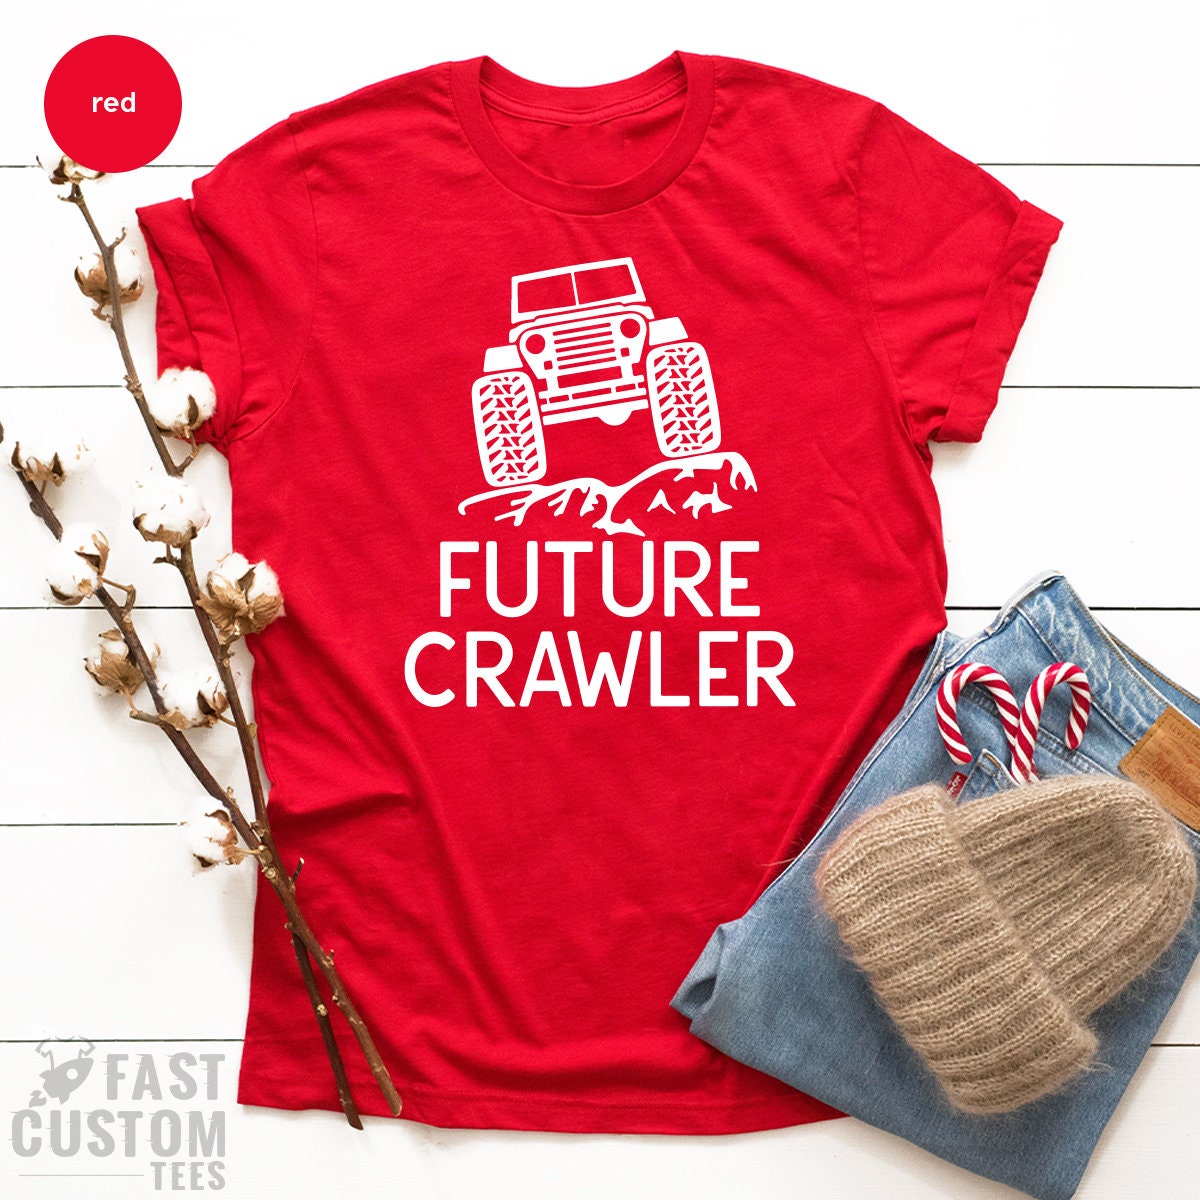 Future Crawler Shirt, Funny Baby Bodysuit, Jeeper Babysuit, Off Roading Baby, Baby Shower Gift, Hipster Baby Shirt, New Baby Gifts - Fastdeliverytees.com